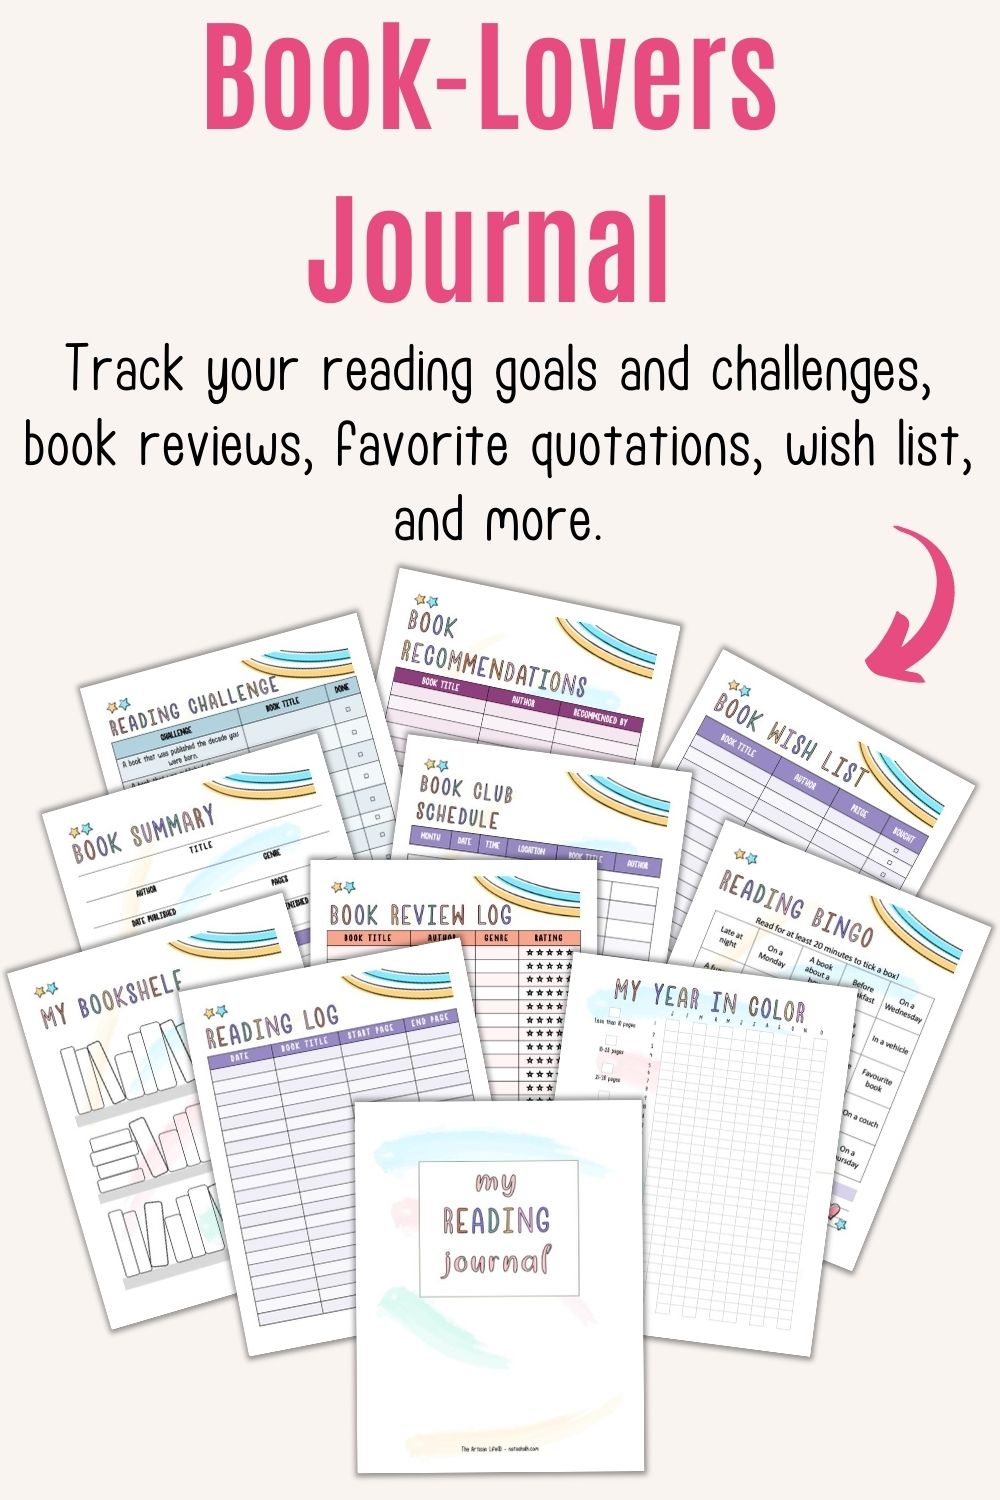 Reading Journal Template Reading Tracker, Reading Log, Book